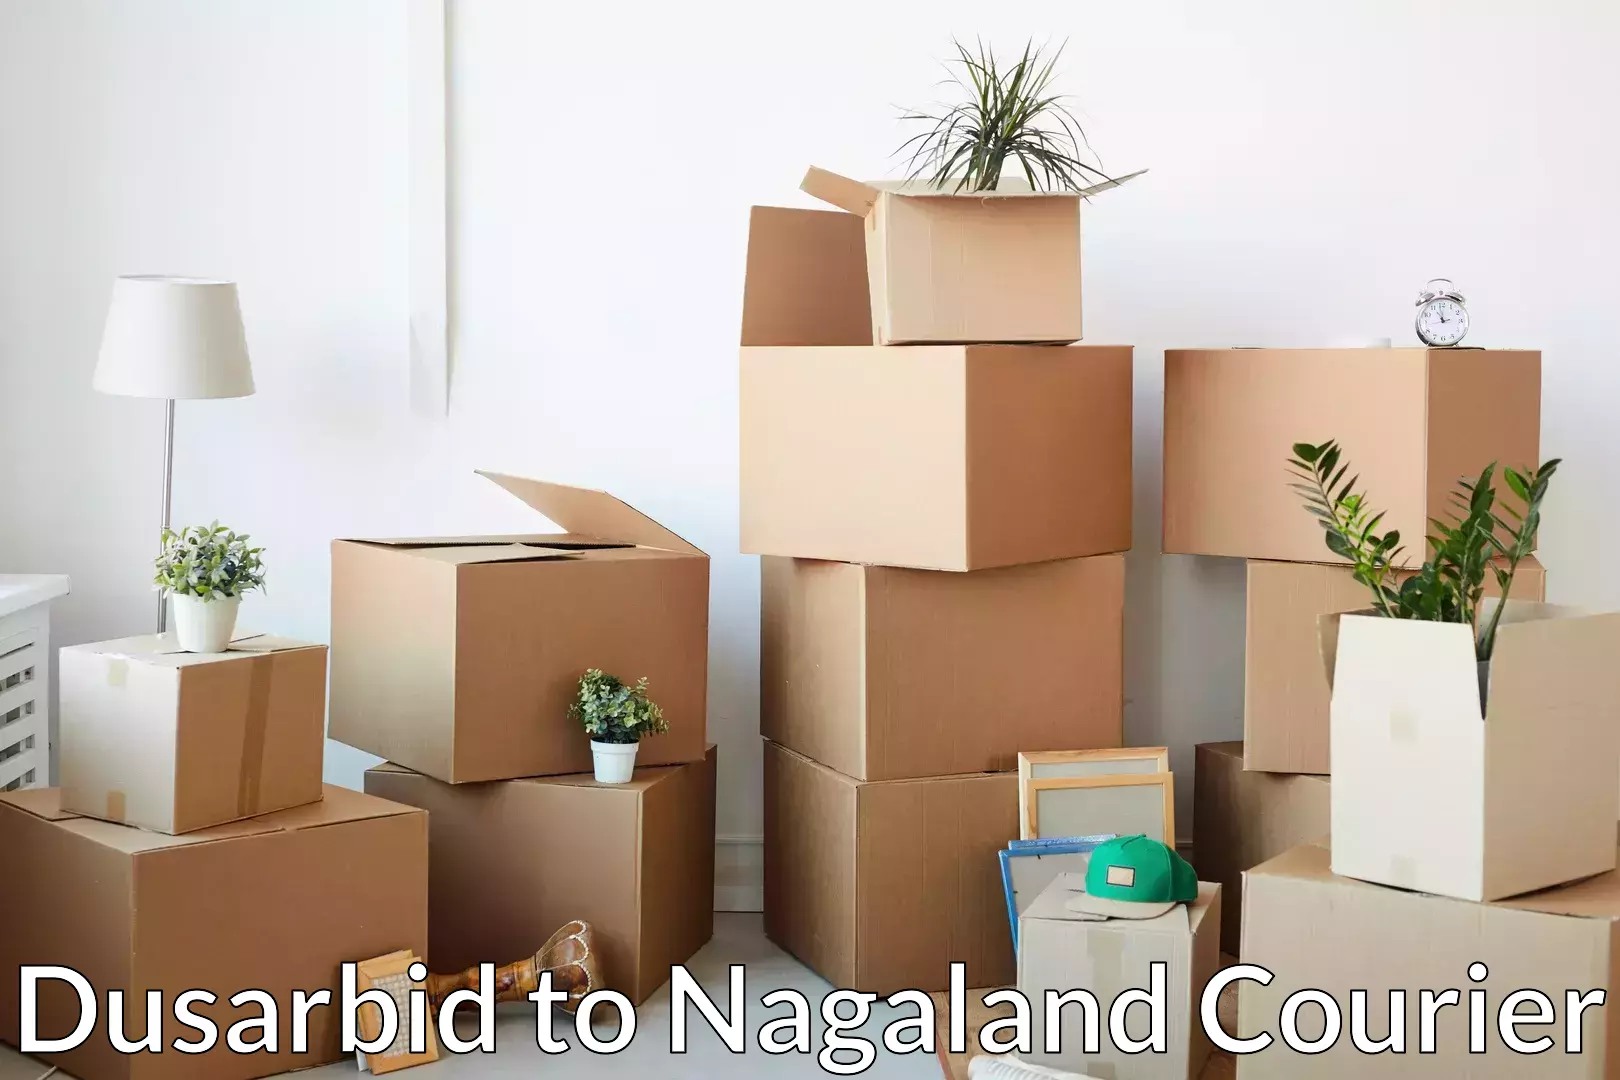 Customized moving experience Dusarbid to Nagaland